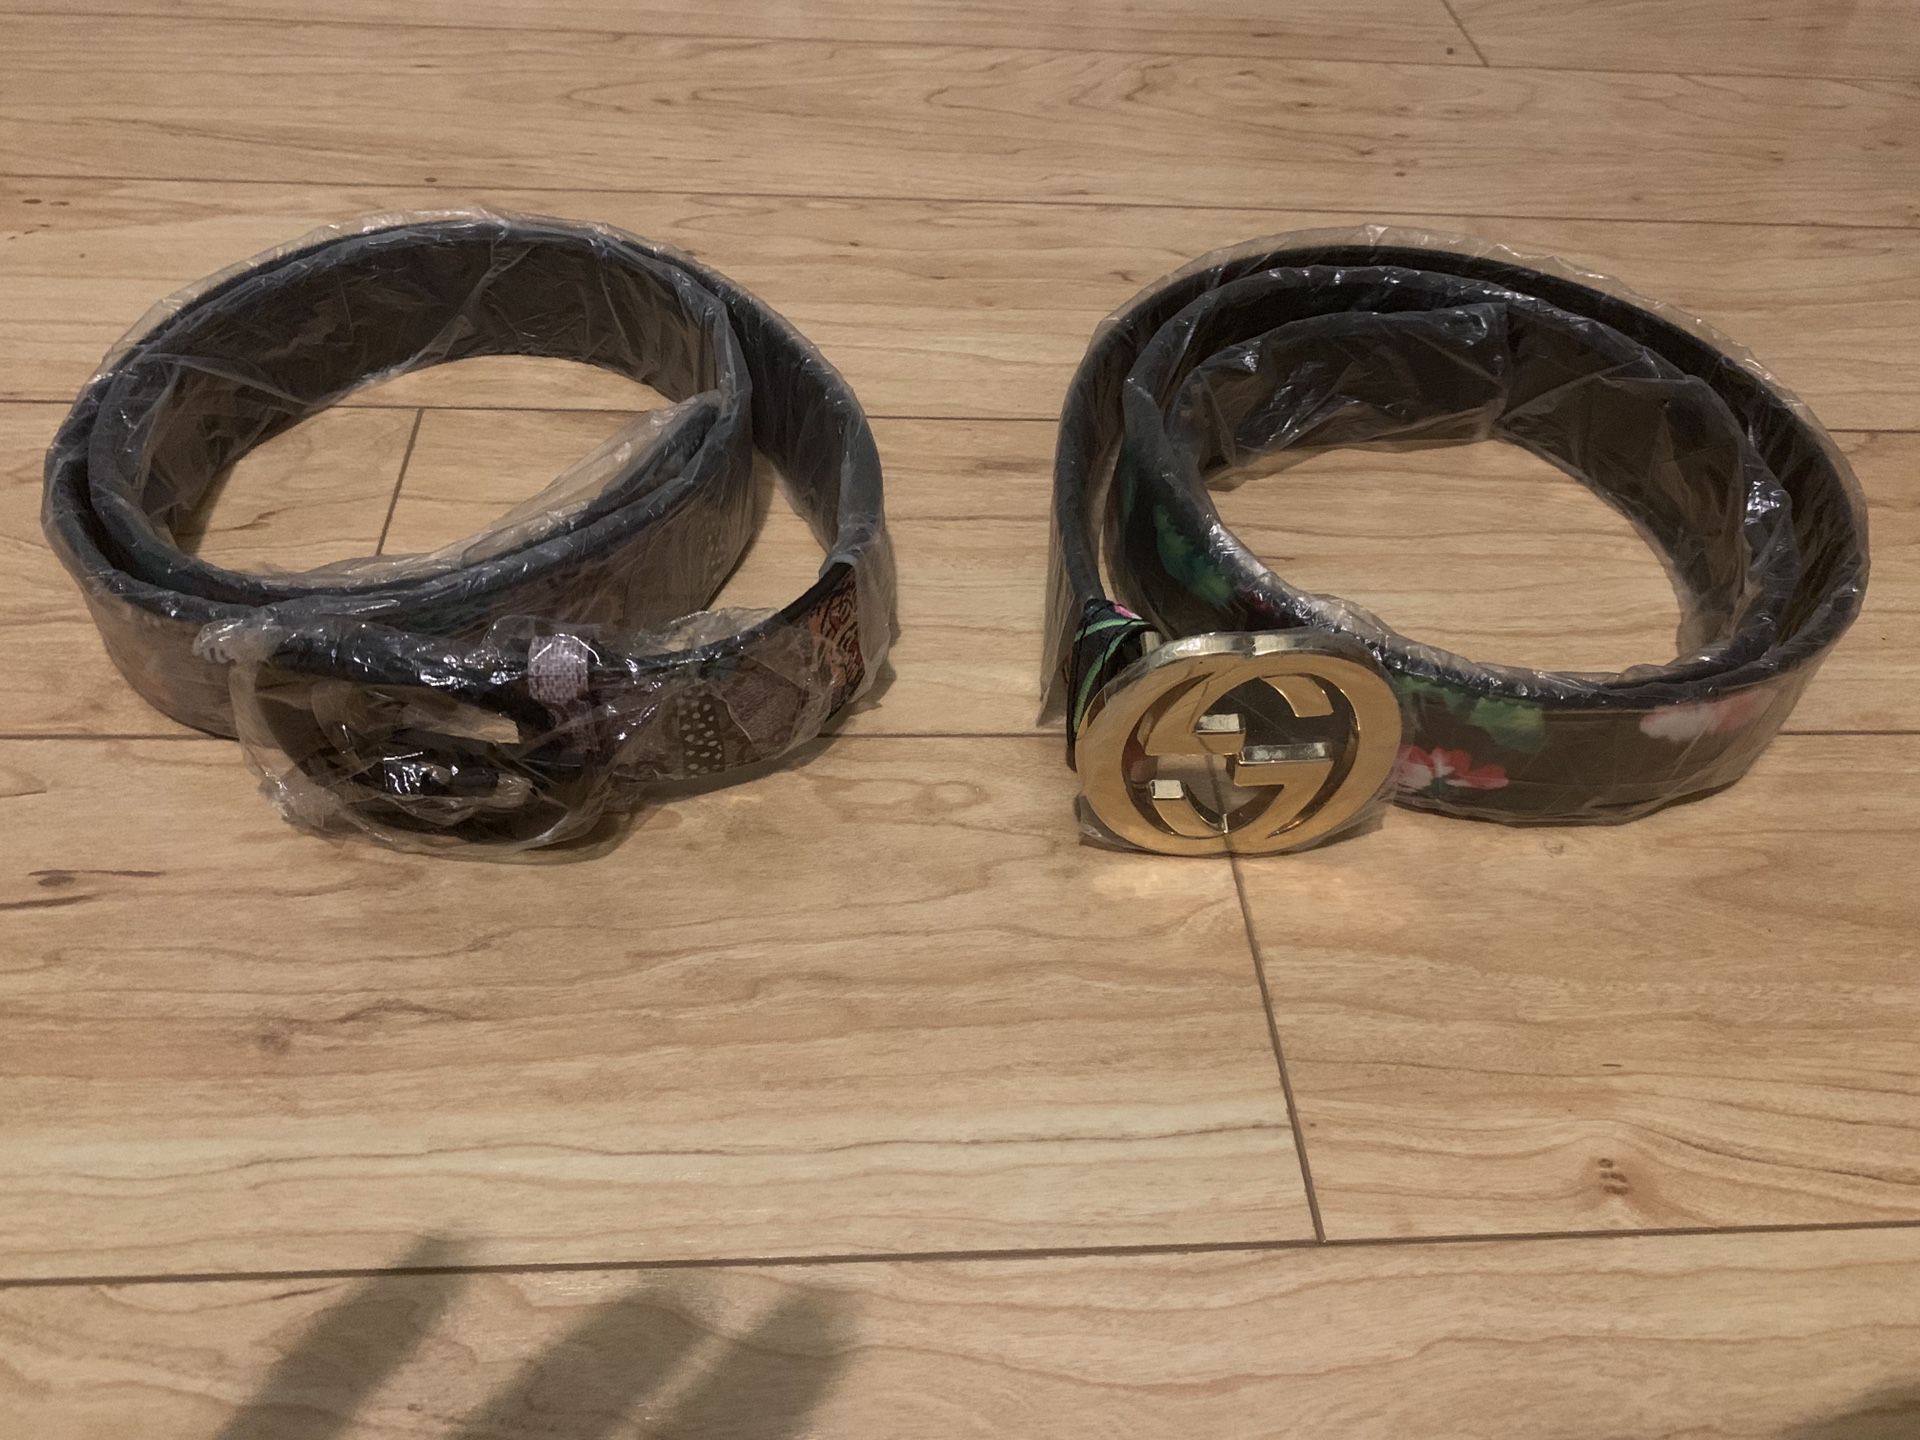 2 Gucci Belts. Can buy separate, Price is negotiable